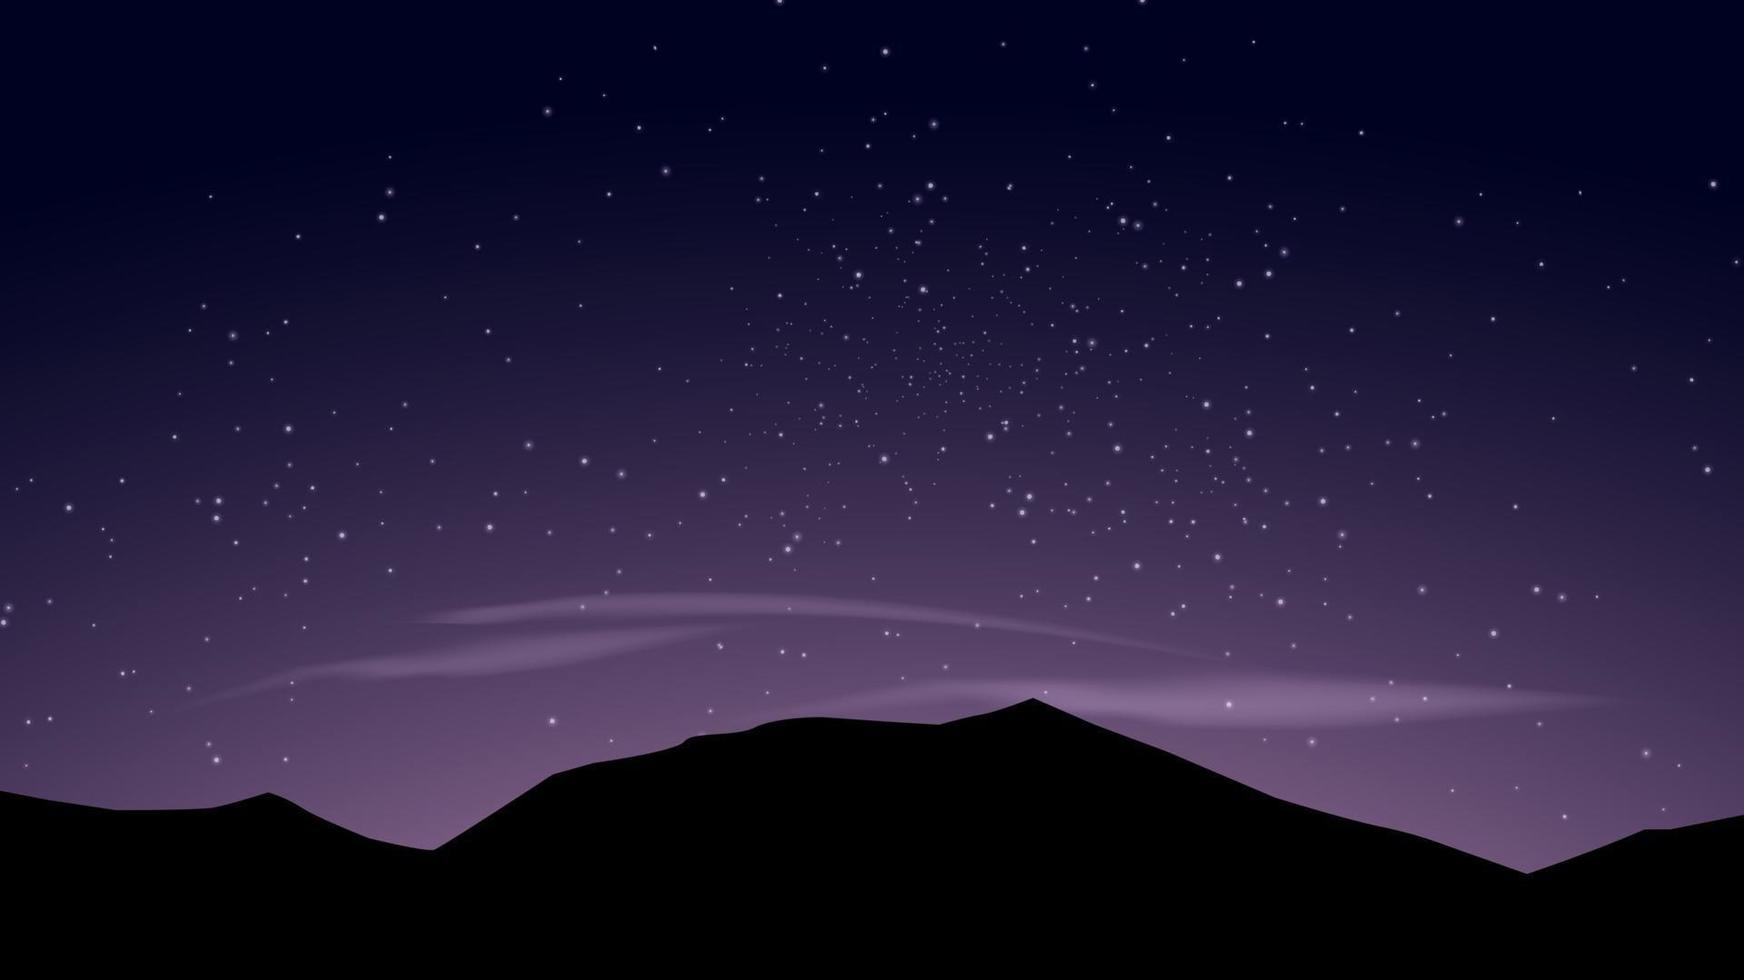 Mountain Silhouette Illustration With Starry Sky vector